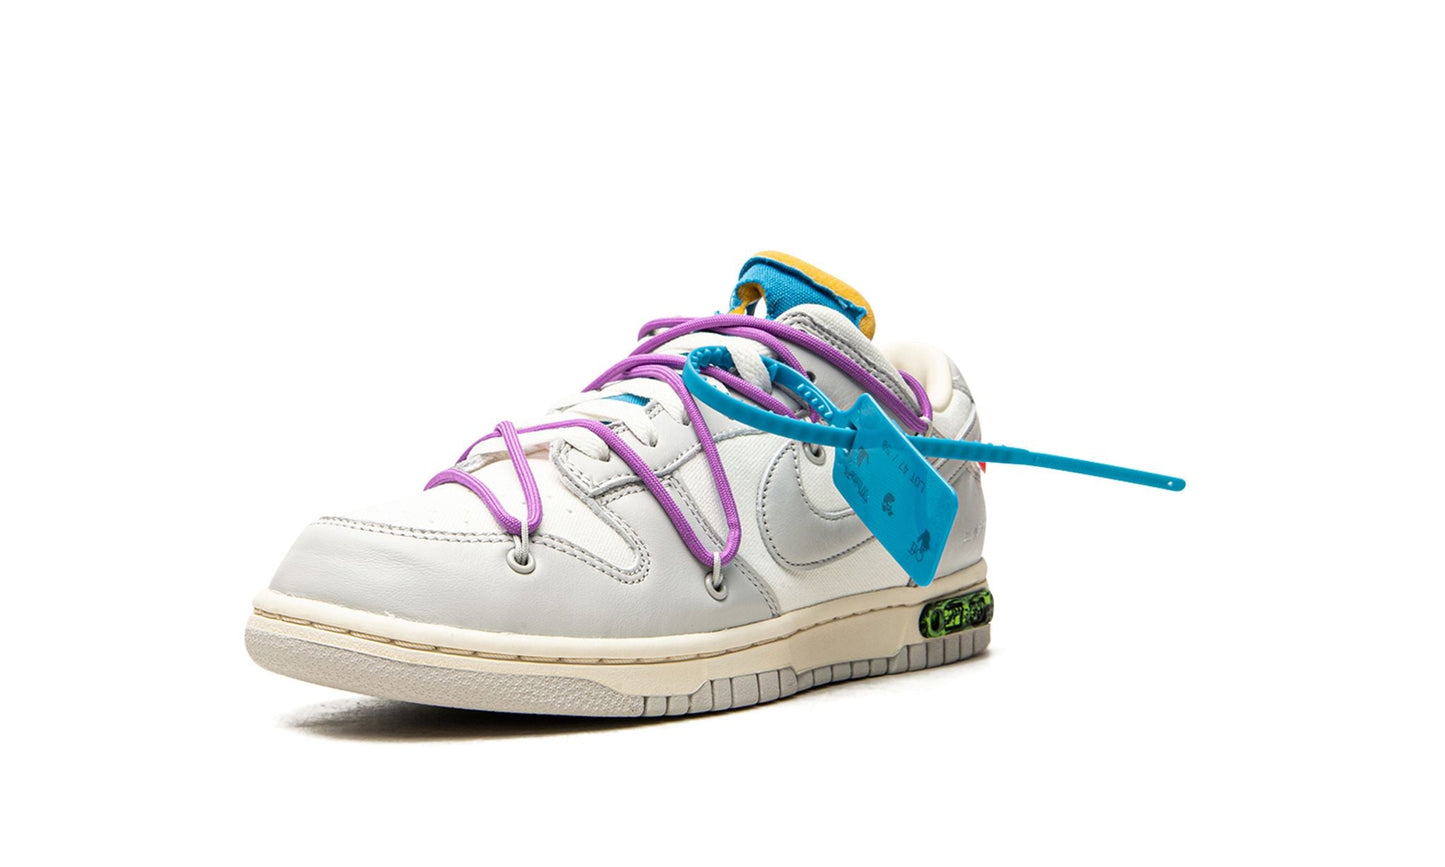 NIKE X OFF-WHITE DUNK LOW "Off-White - Lot 47"